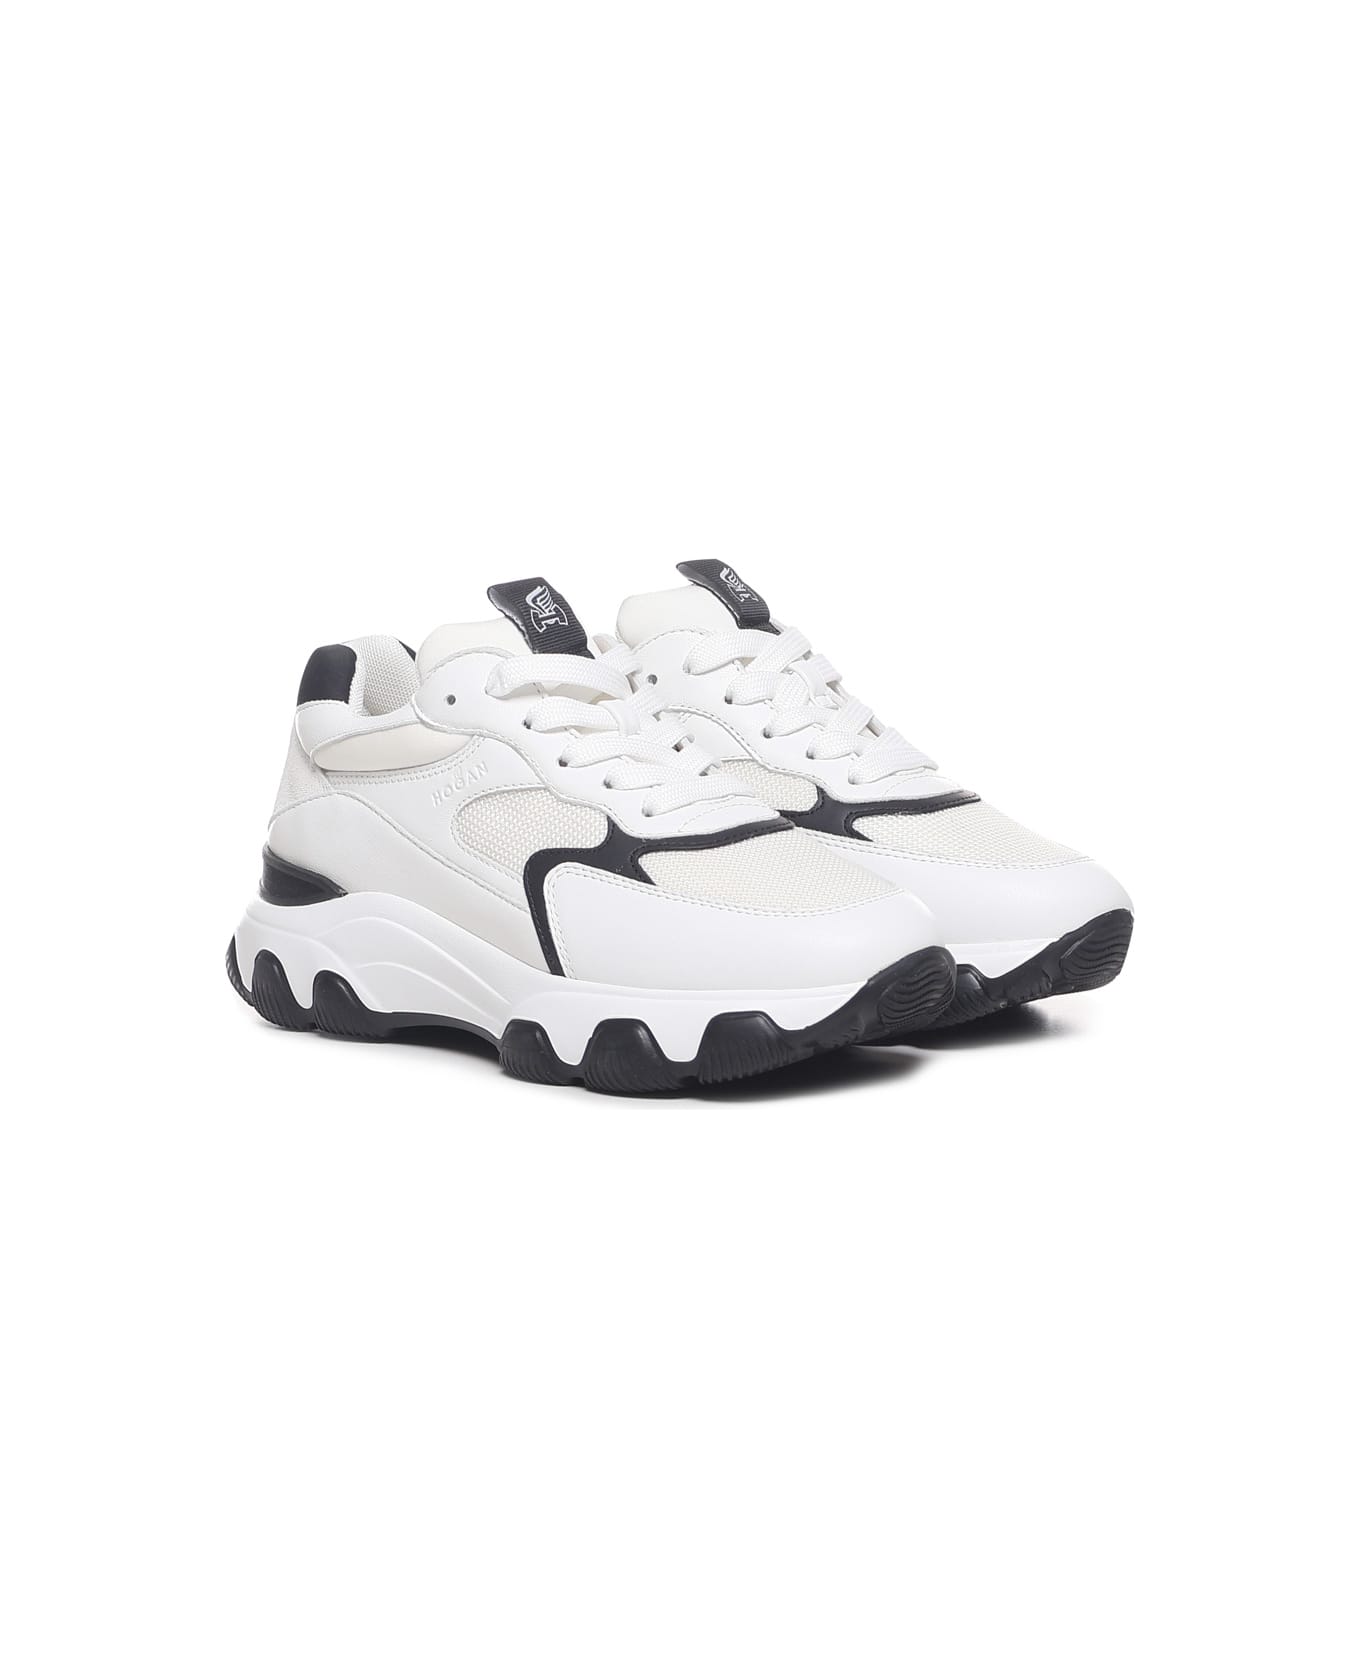 Hogan Hyperactive Sneakers In Leather And Nylon - White